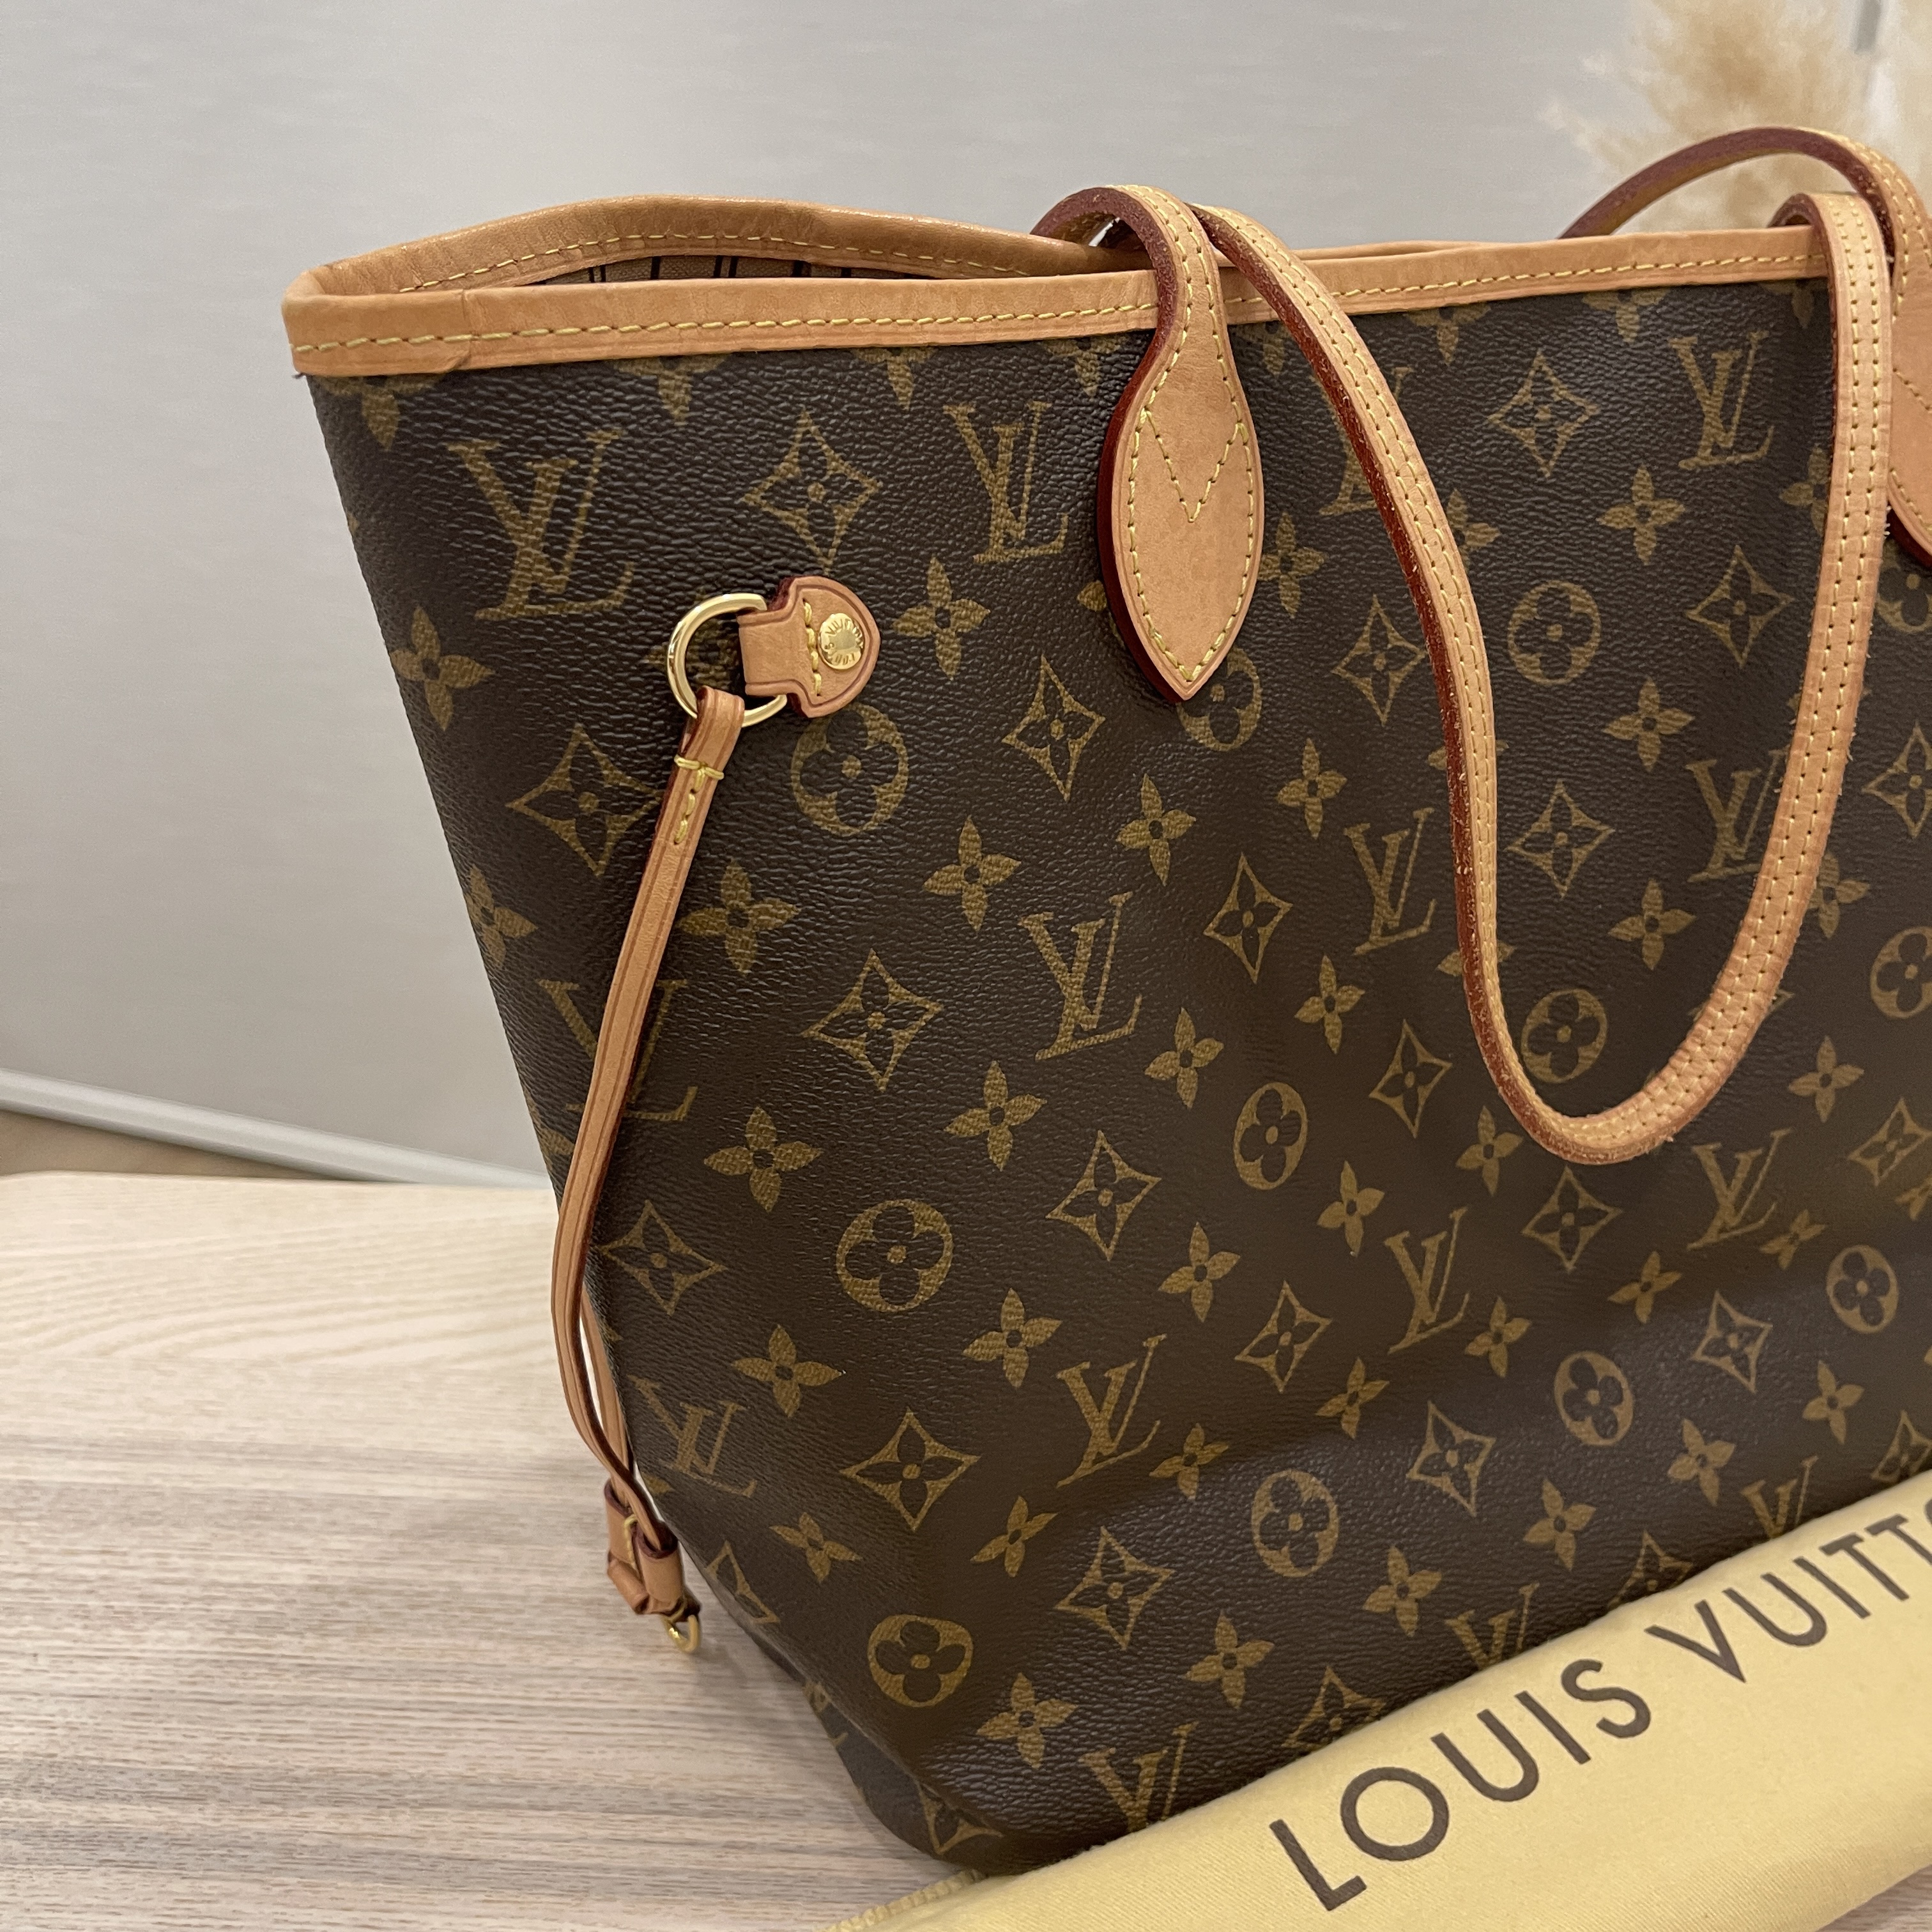 Neverfull - Louis Vuitton s Fornasetti-patterned coat for fall 21 - Tote -  M40156 – LVMH Moet Hennessy Louis Vuitton - Monogram - Bag - Louis - MM -  Vuitton